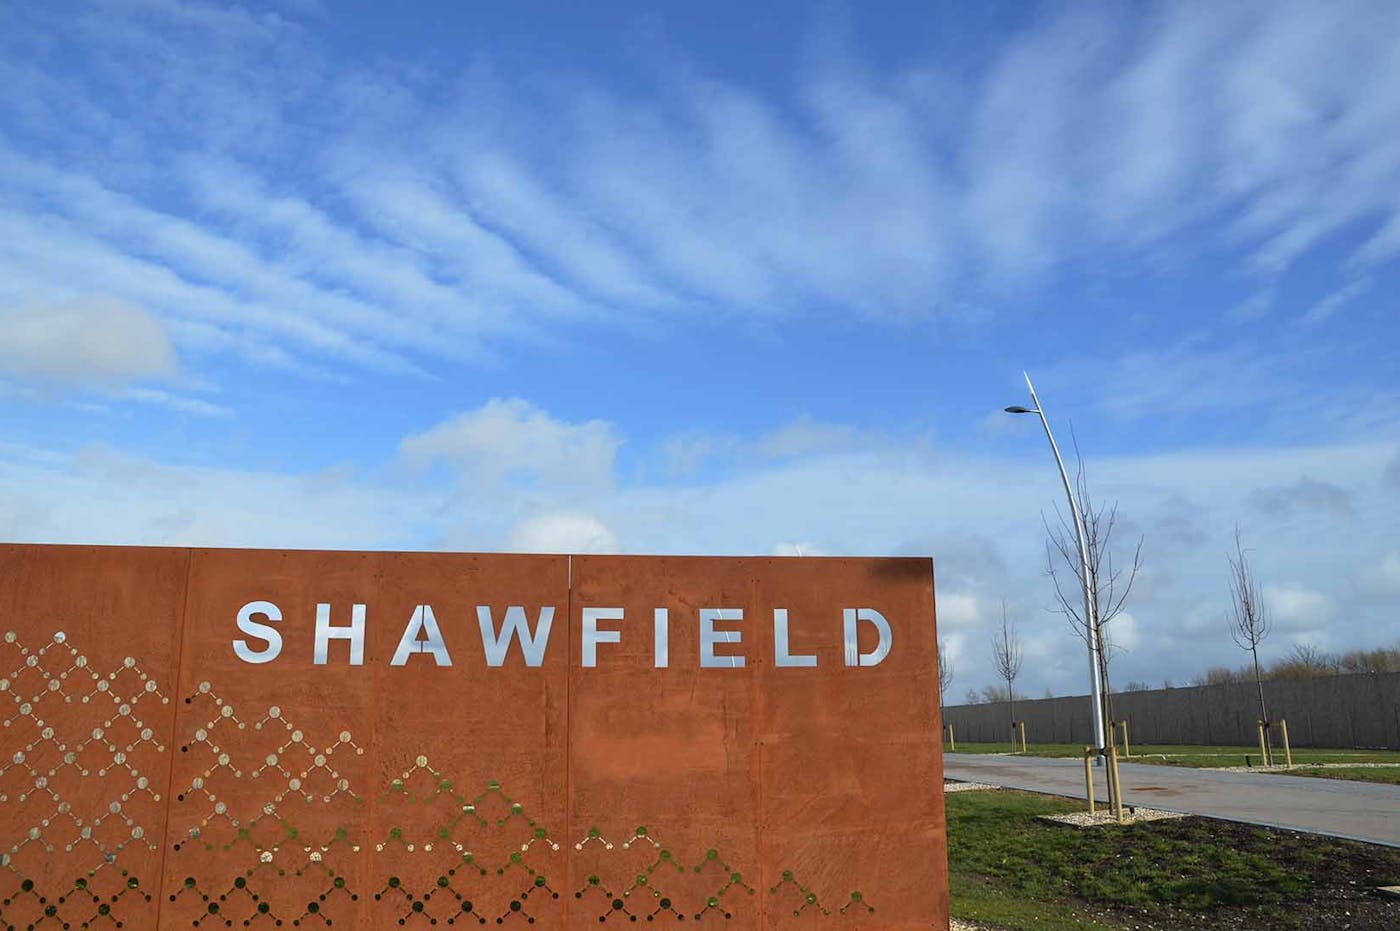 Shawfield National Business District, Glasgow